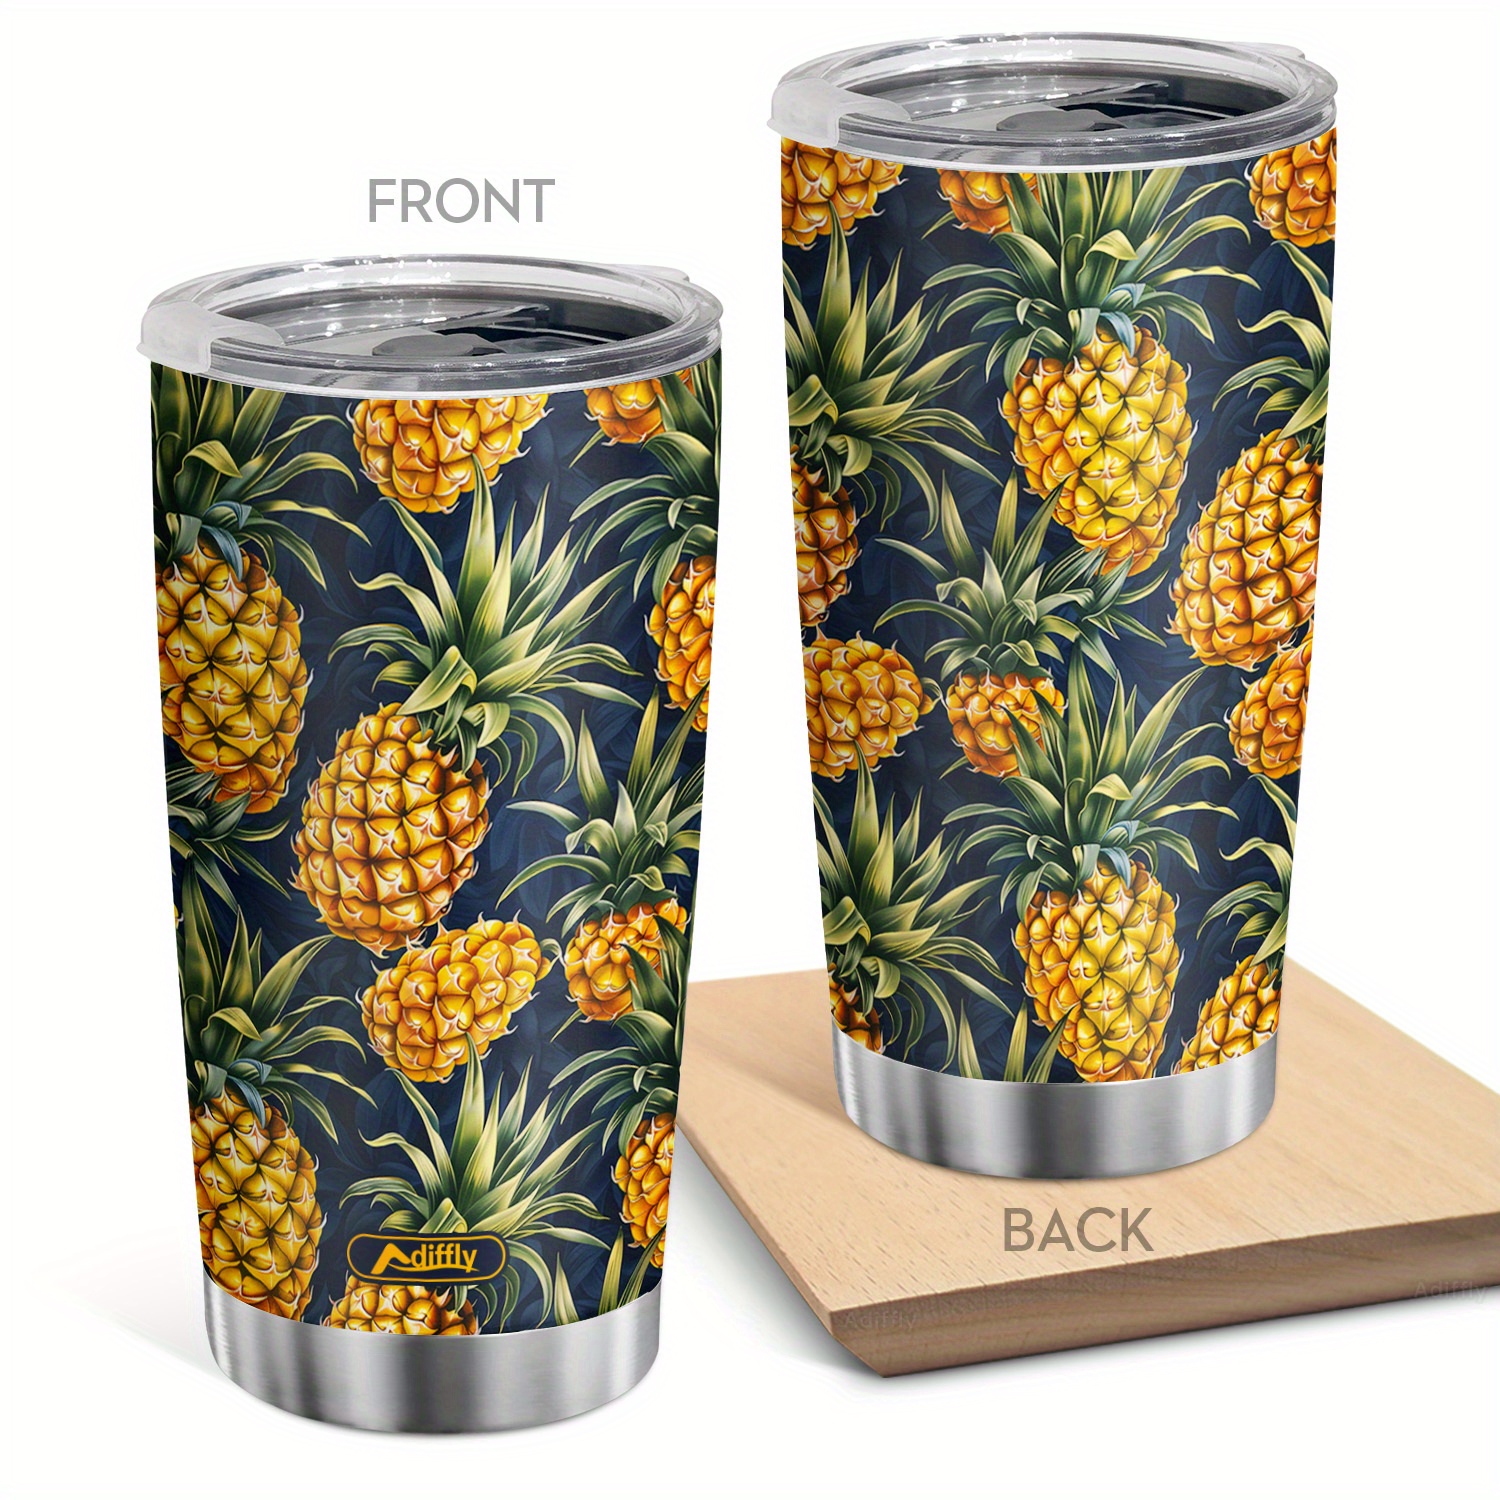 

Adiffly 20oz Pineapple Printed Stainless Steel Tumbler With Lid - Double Wall Vacuum Insulation For Cold & Hot Drinks - Suitable For Catering, Home Kitchen, Food Truck, And Restaurant Use